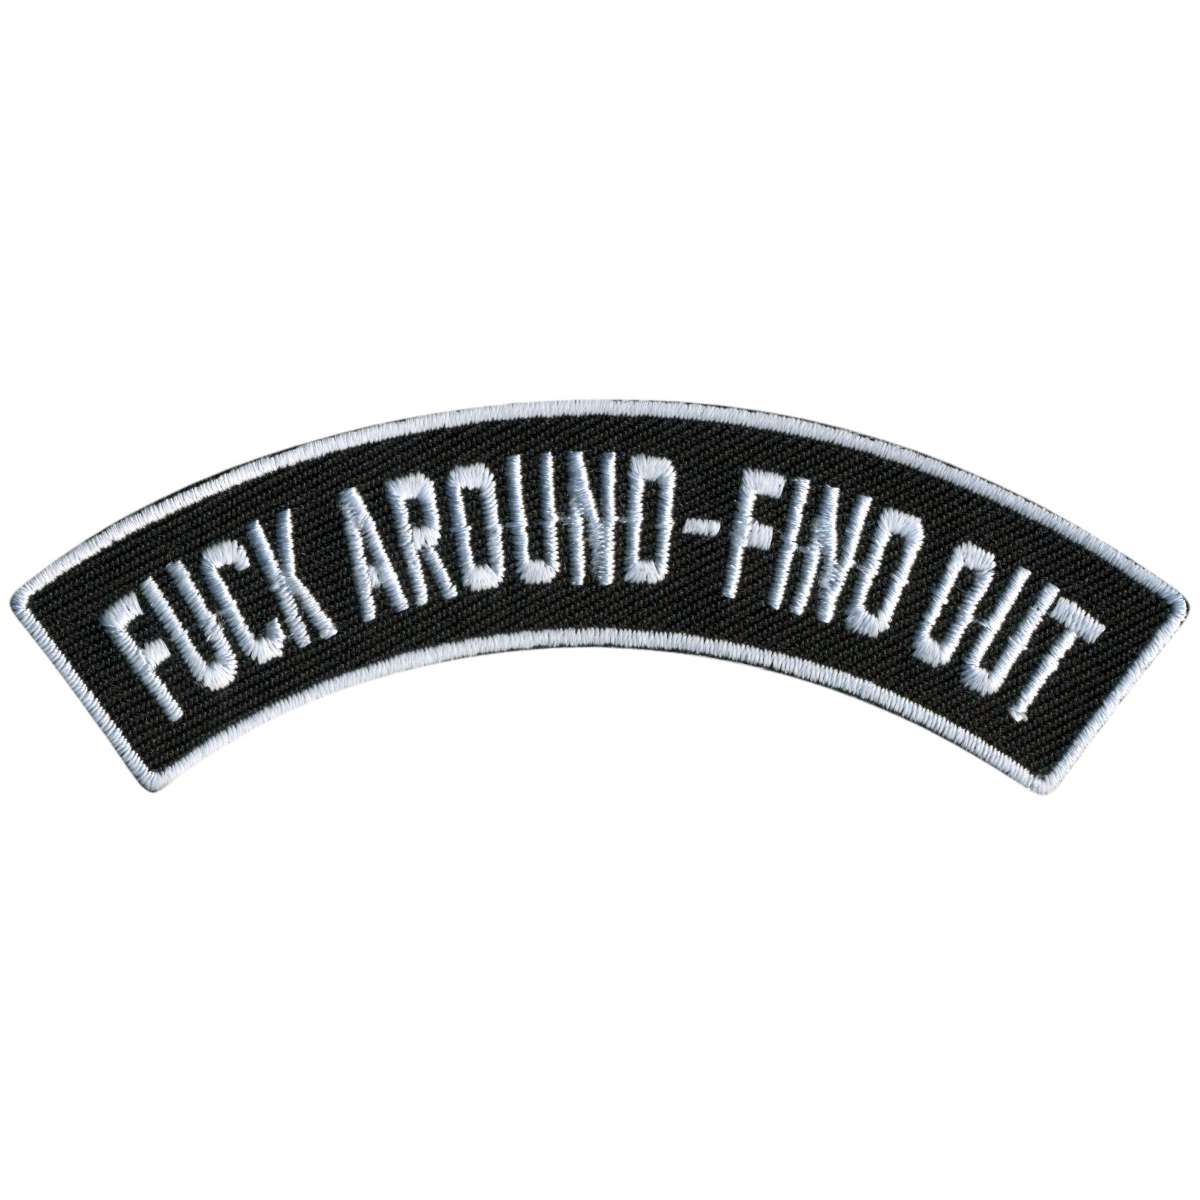 Hot Leathers F*** Around- Find Out 4” X 1” Top Rocker Patch PPM4168